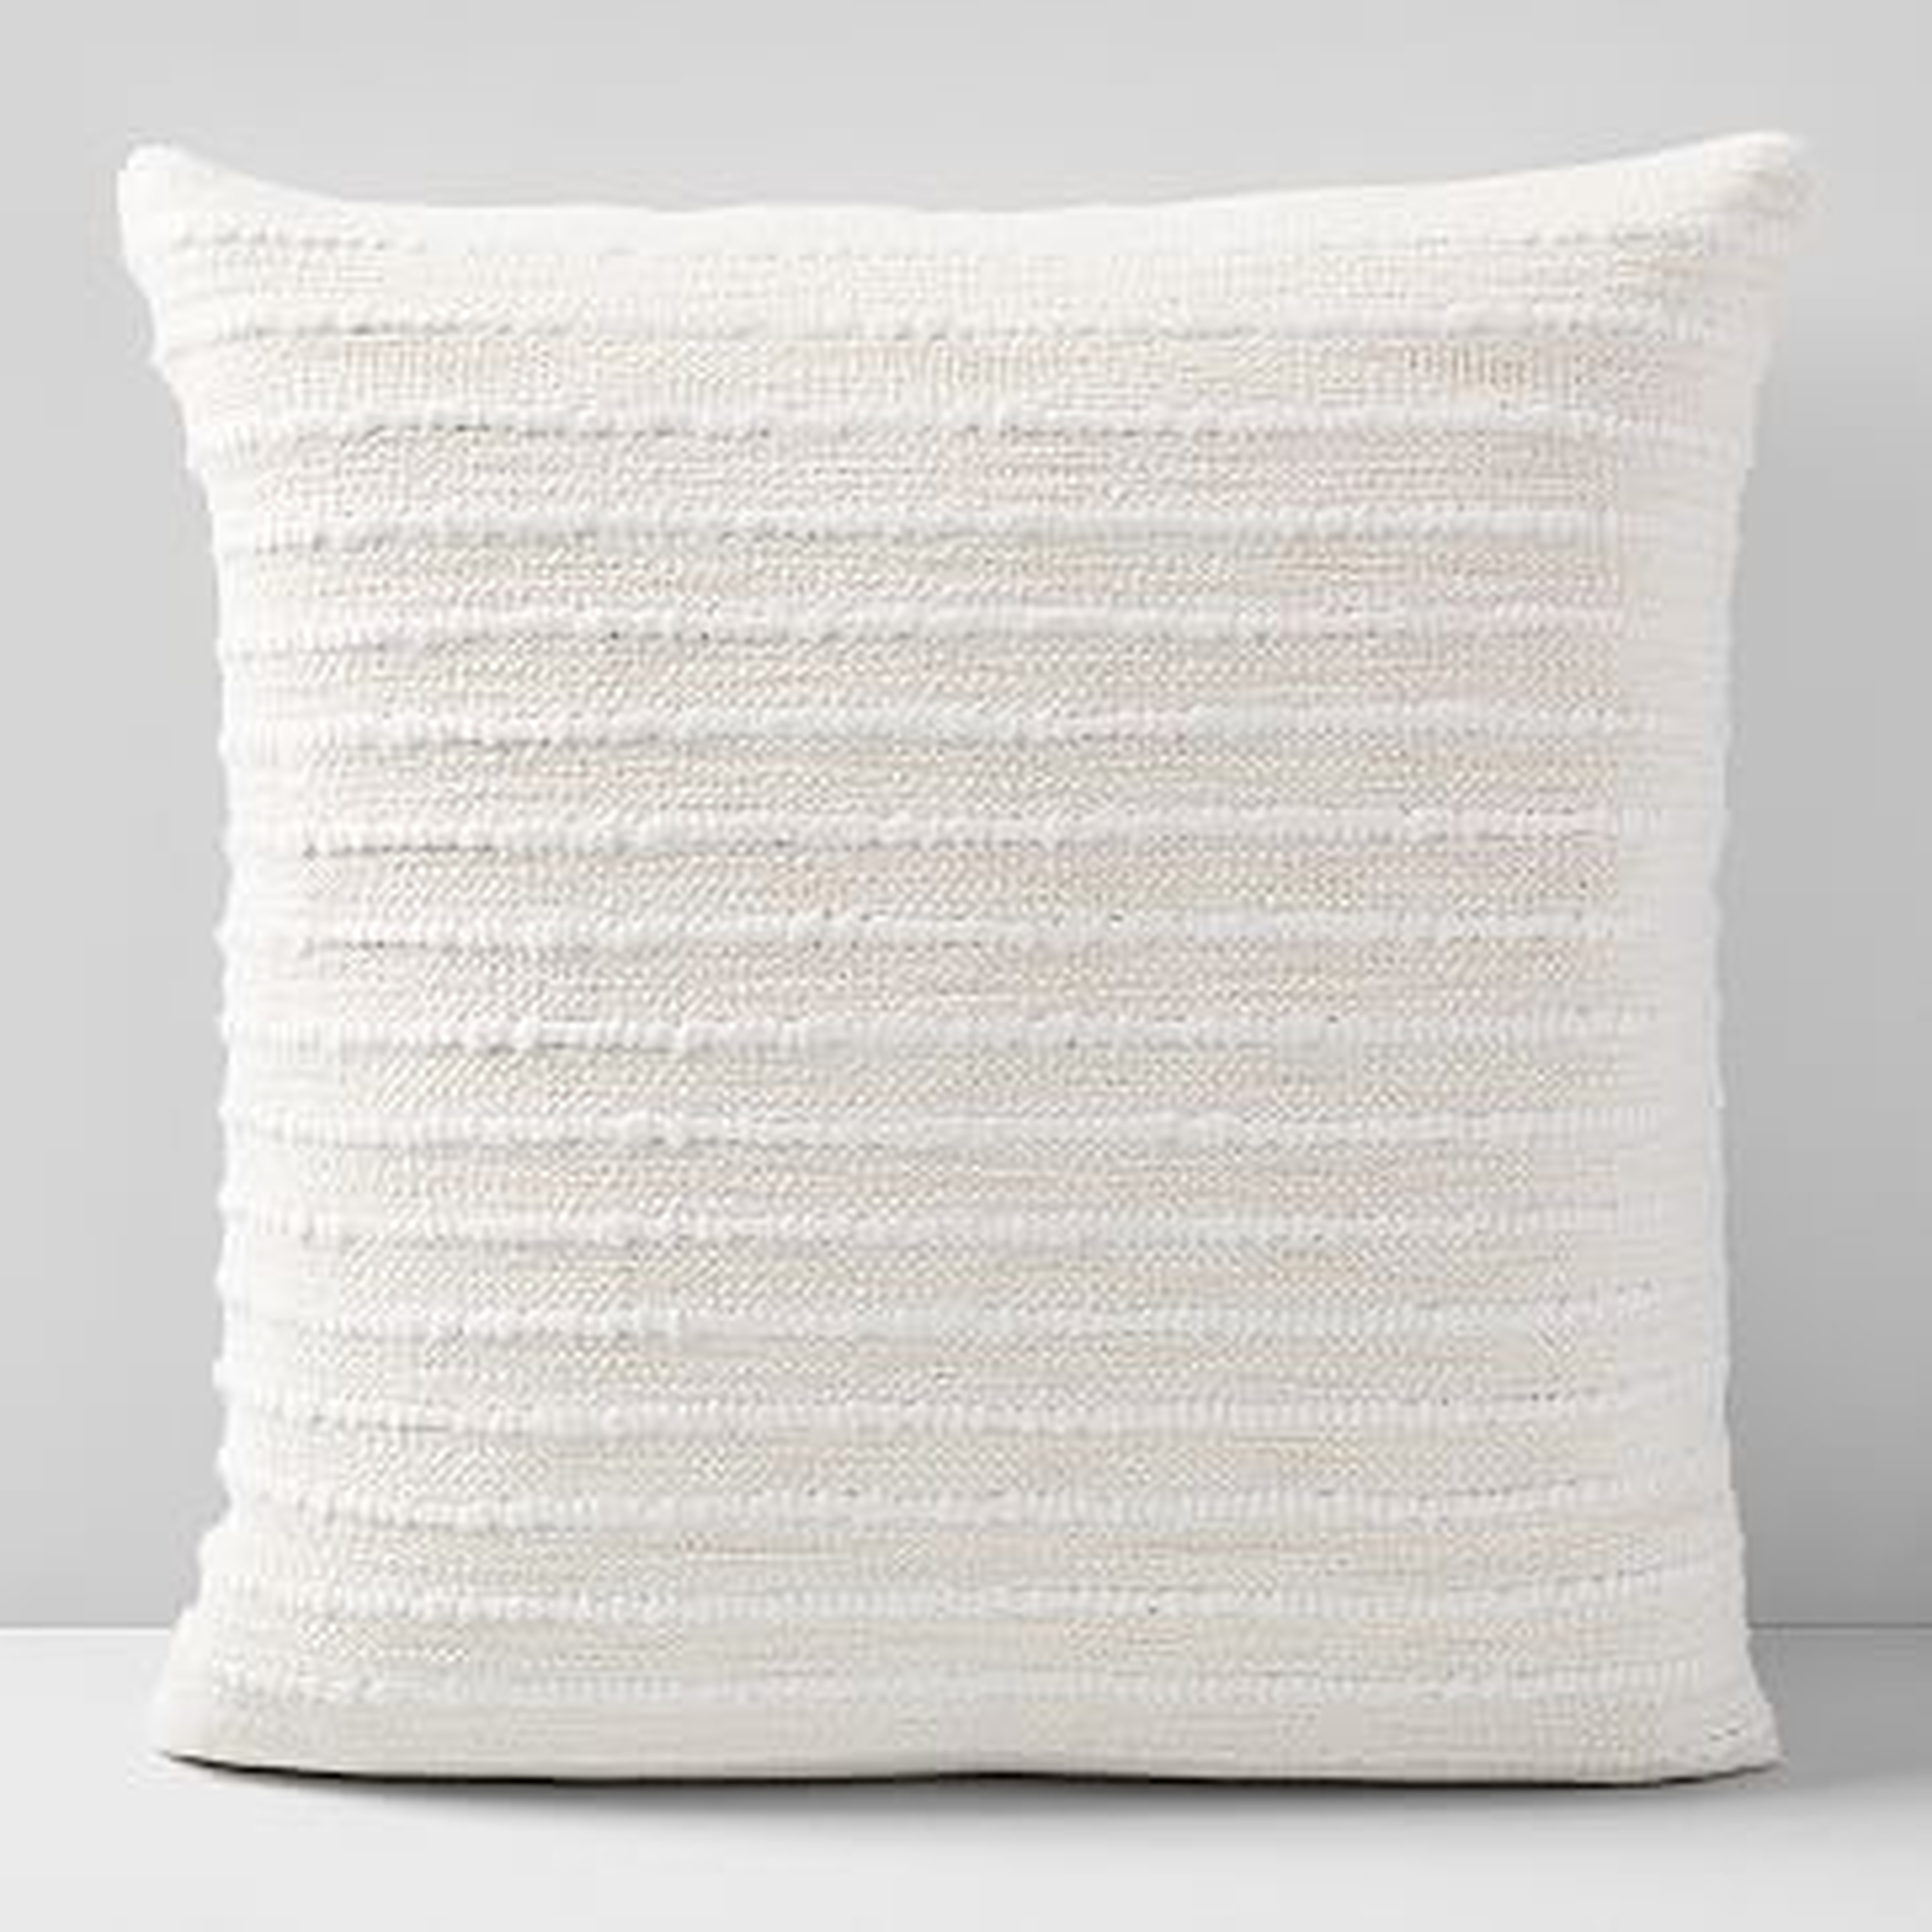 Soft Corded Pillow Cover, Natural Canvas, 20"x20" - West Elm